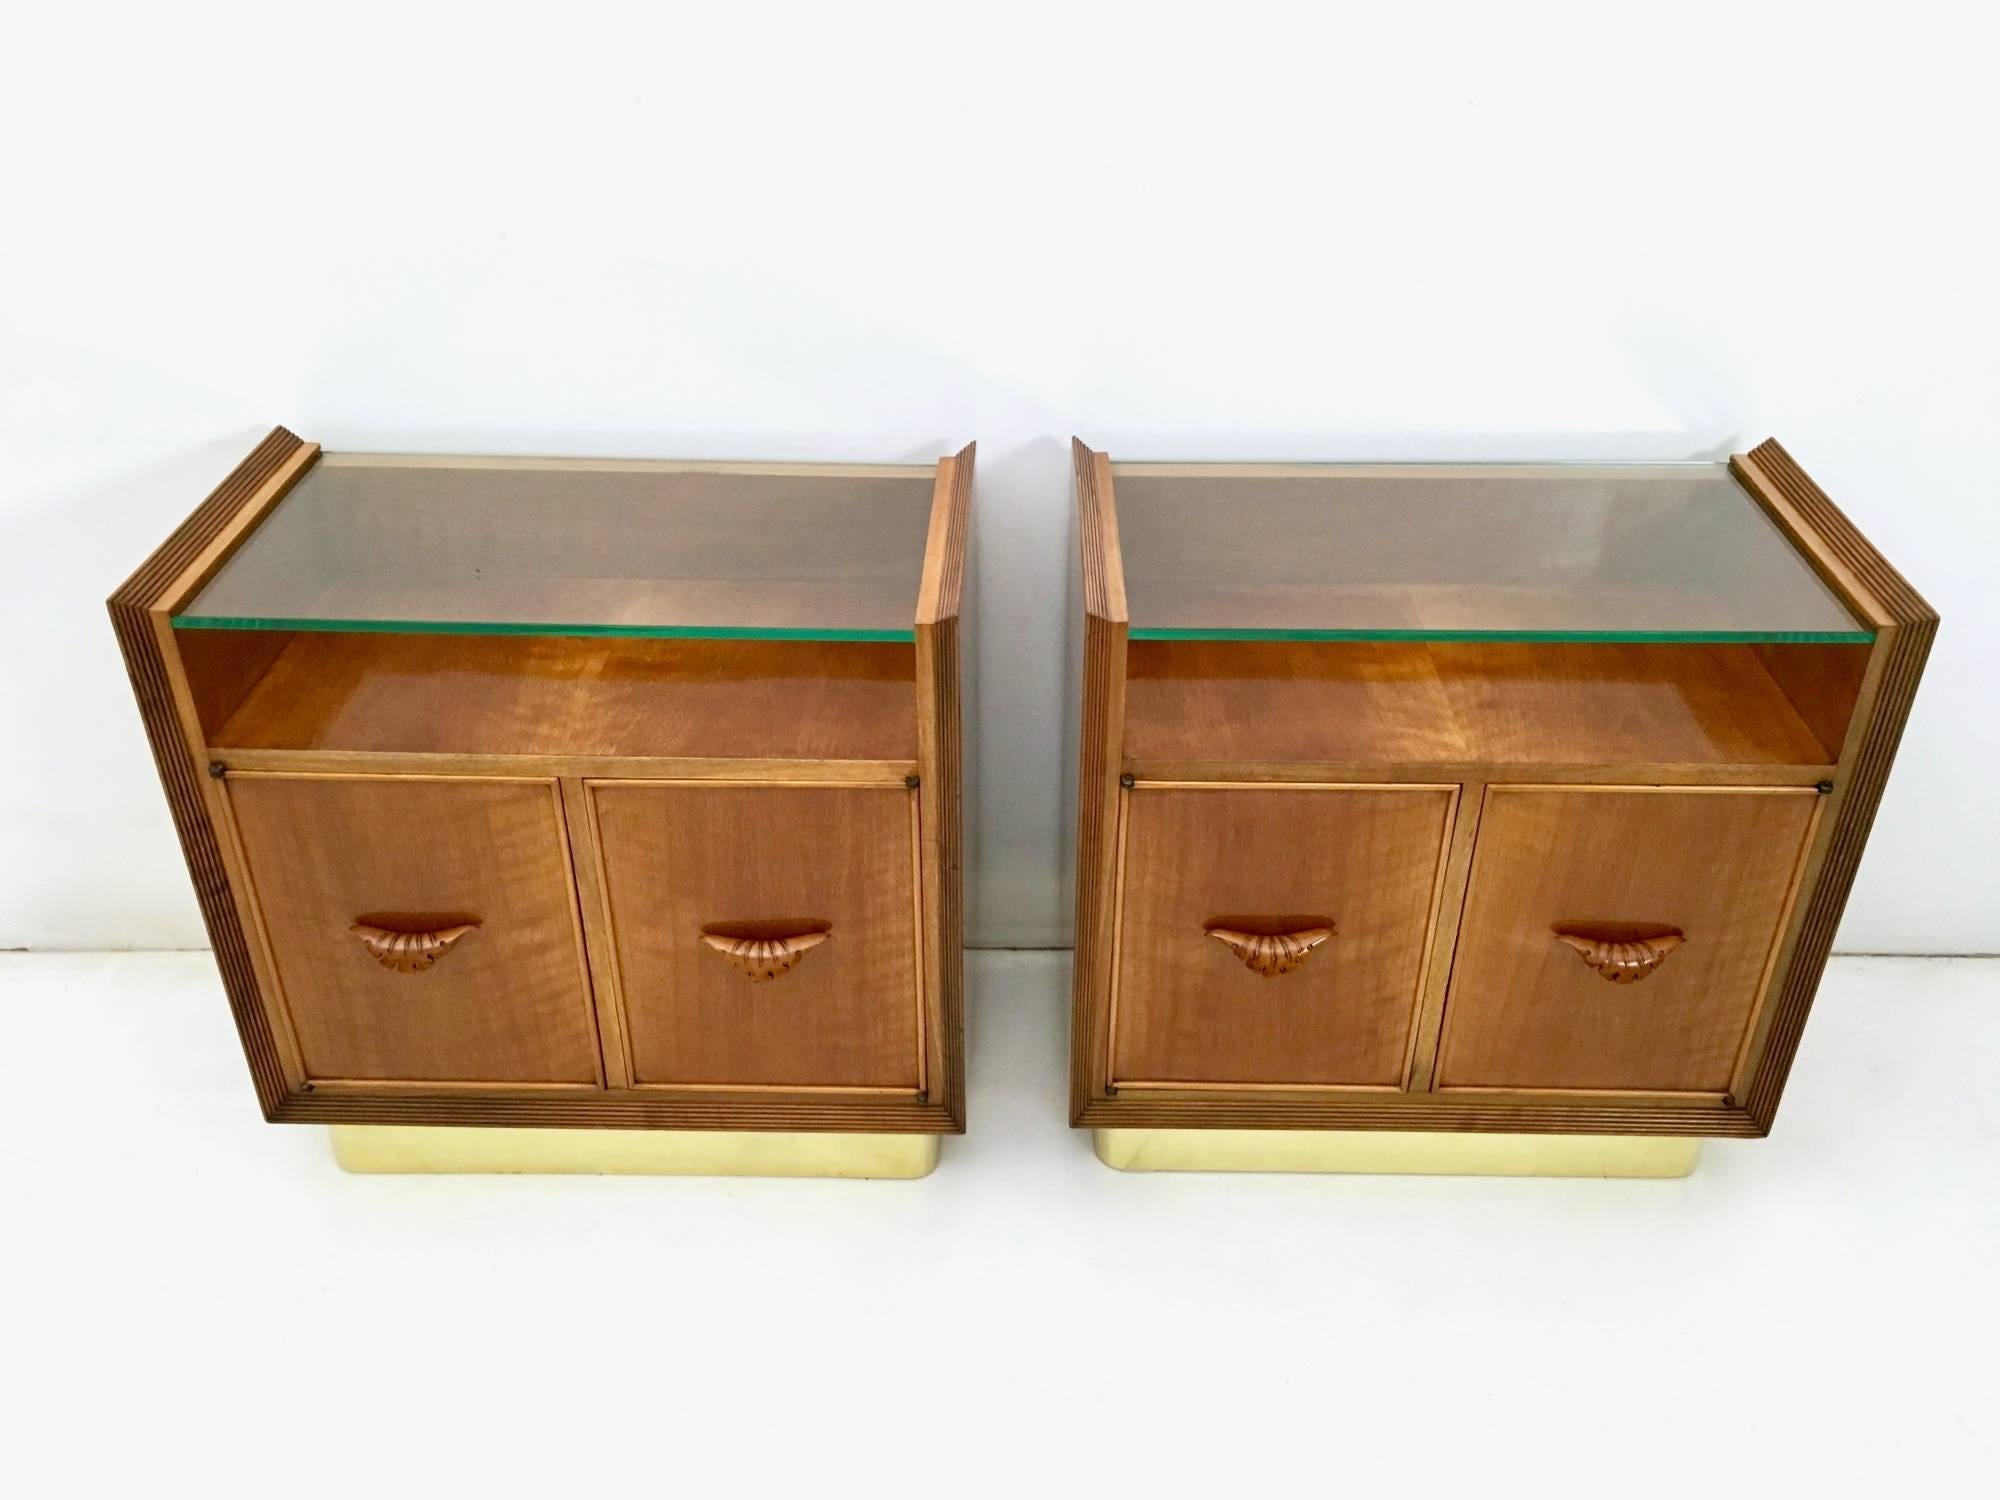 Italian Pair of Walnut Nightstands Ascribable to Borsani with a Crystal Top Italy, 1940s